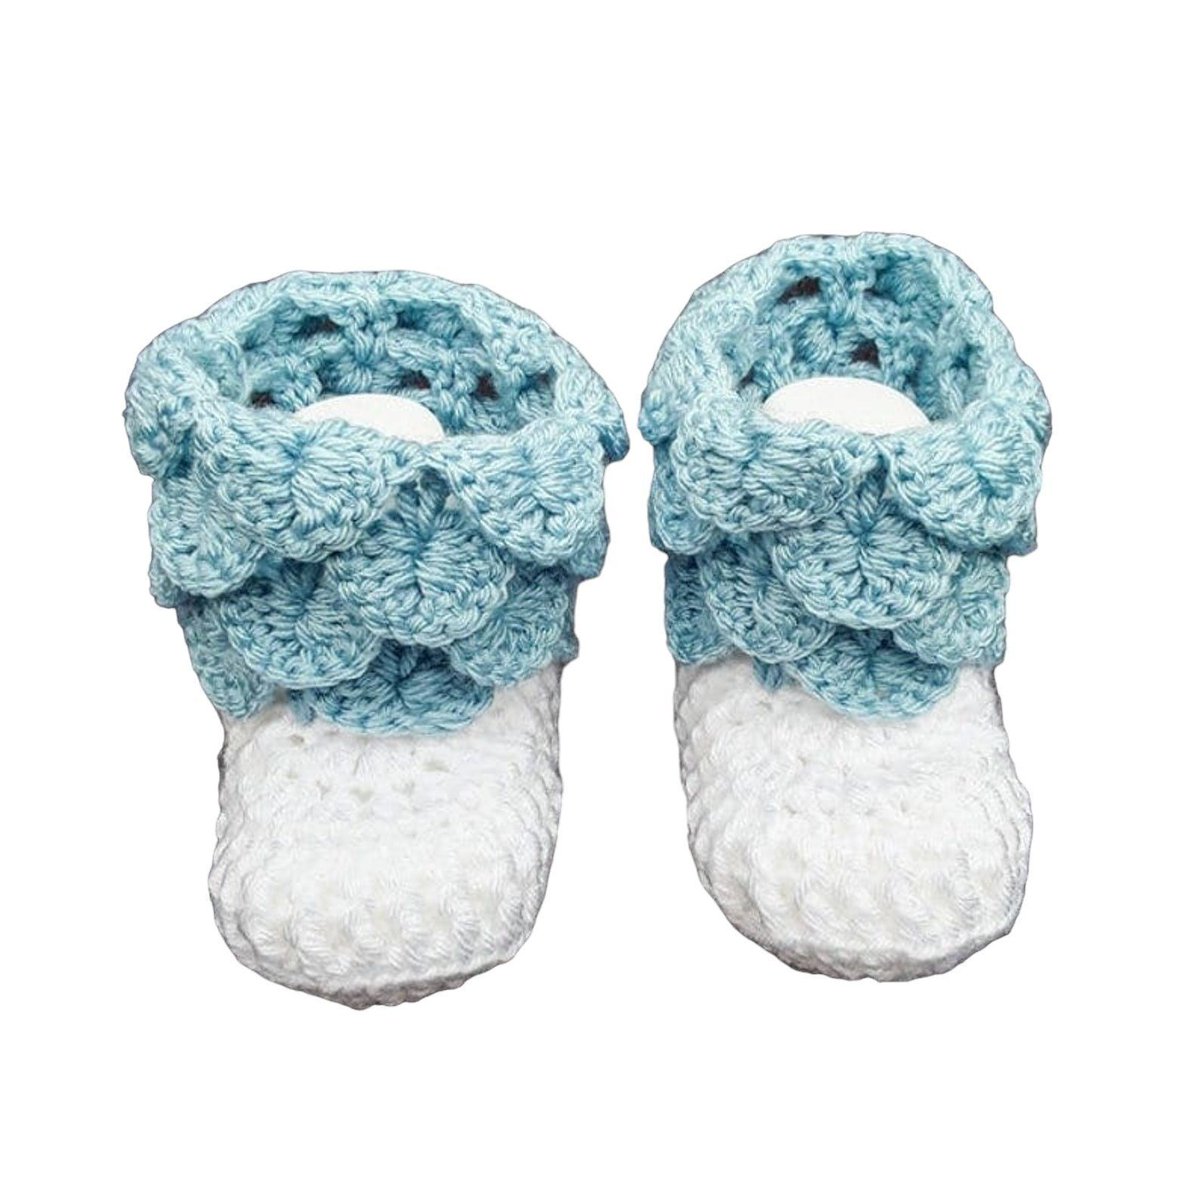 Looking for the perfect baby gift? These blue and white crochet baby booties are just what you need. Handmade and perfect for 6-9 months old. Shop now on #Etsy! #babybooties #handmade knittingtopia.etsy.com/listing/169414… #knittingtopia #craftbizparty #MHHSBD #babyessentials #shophandmade